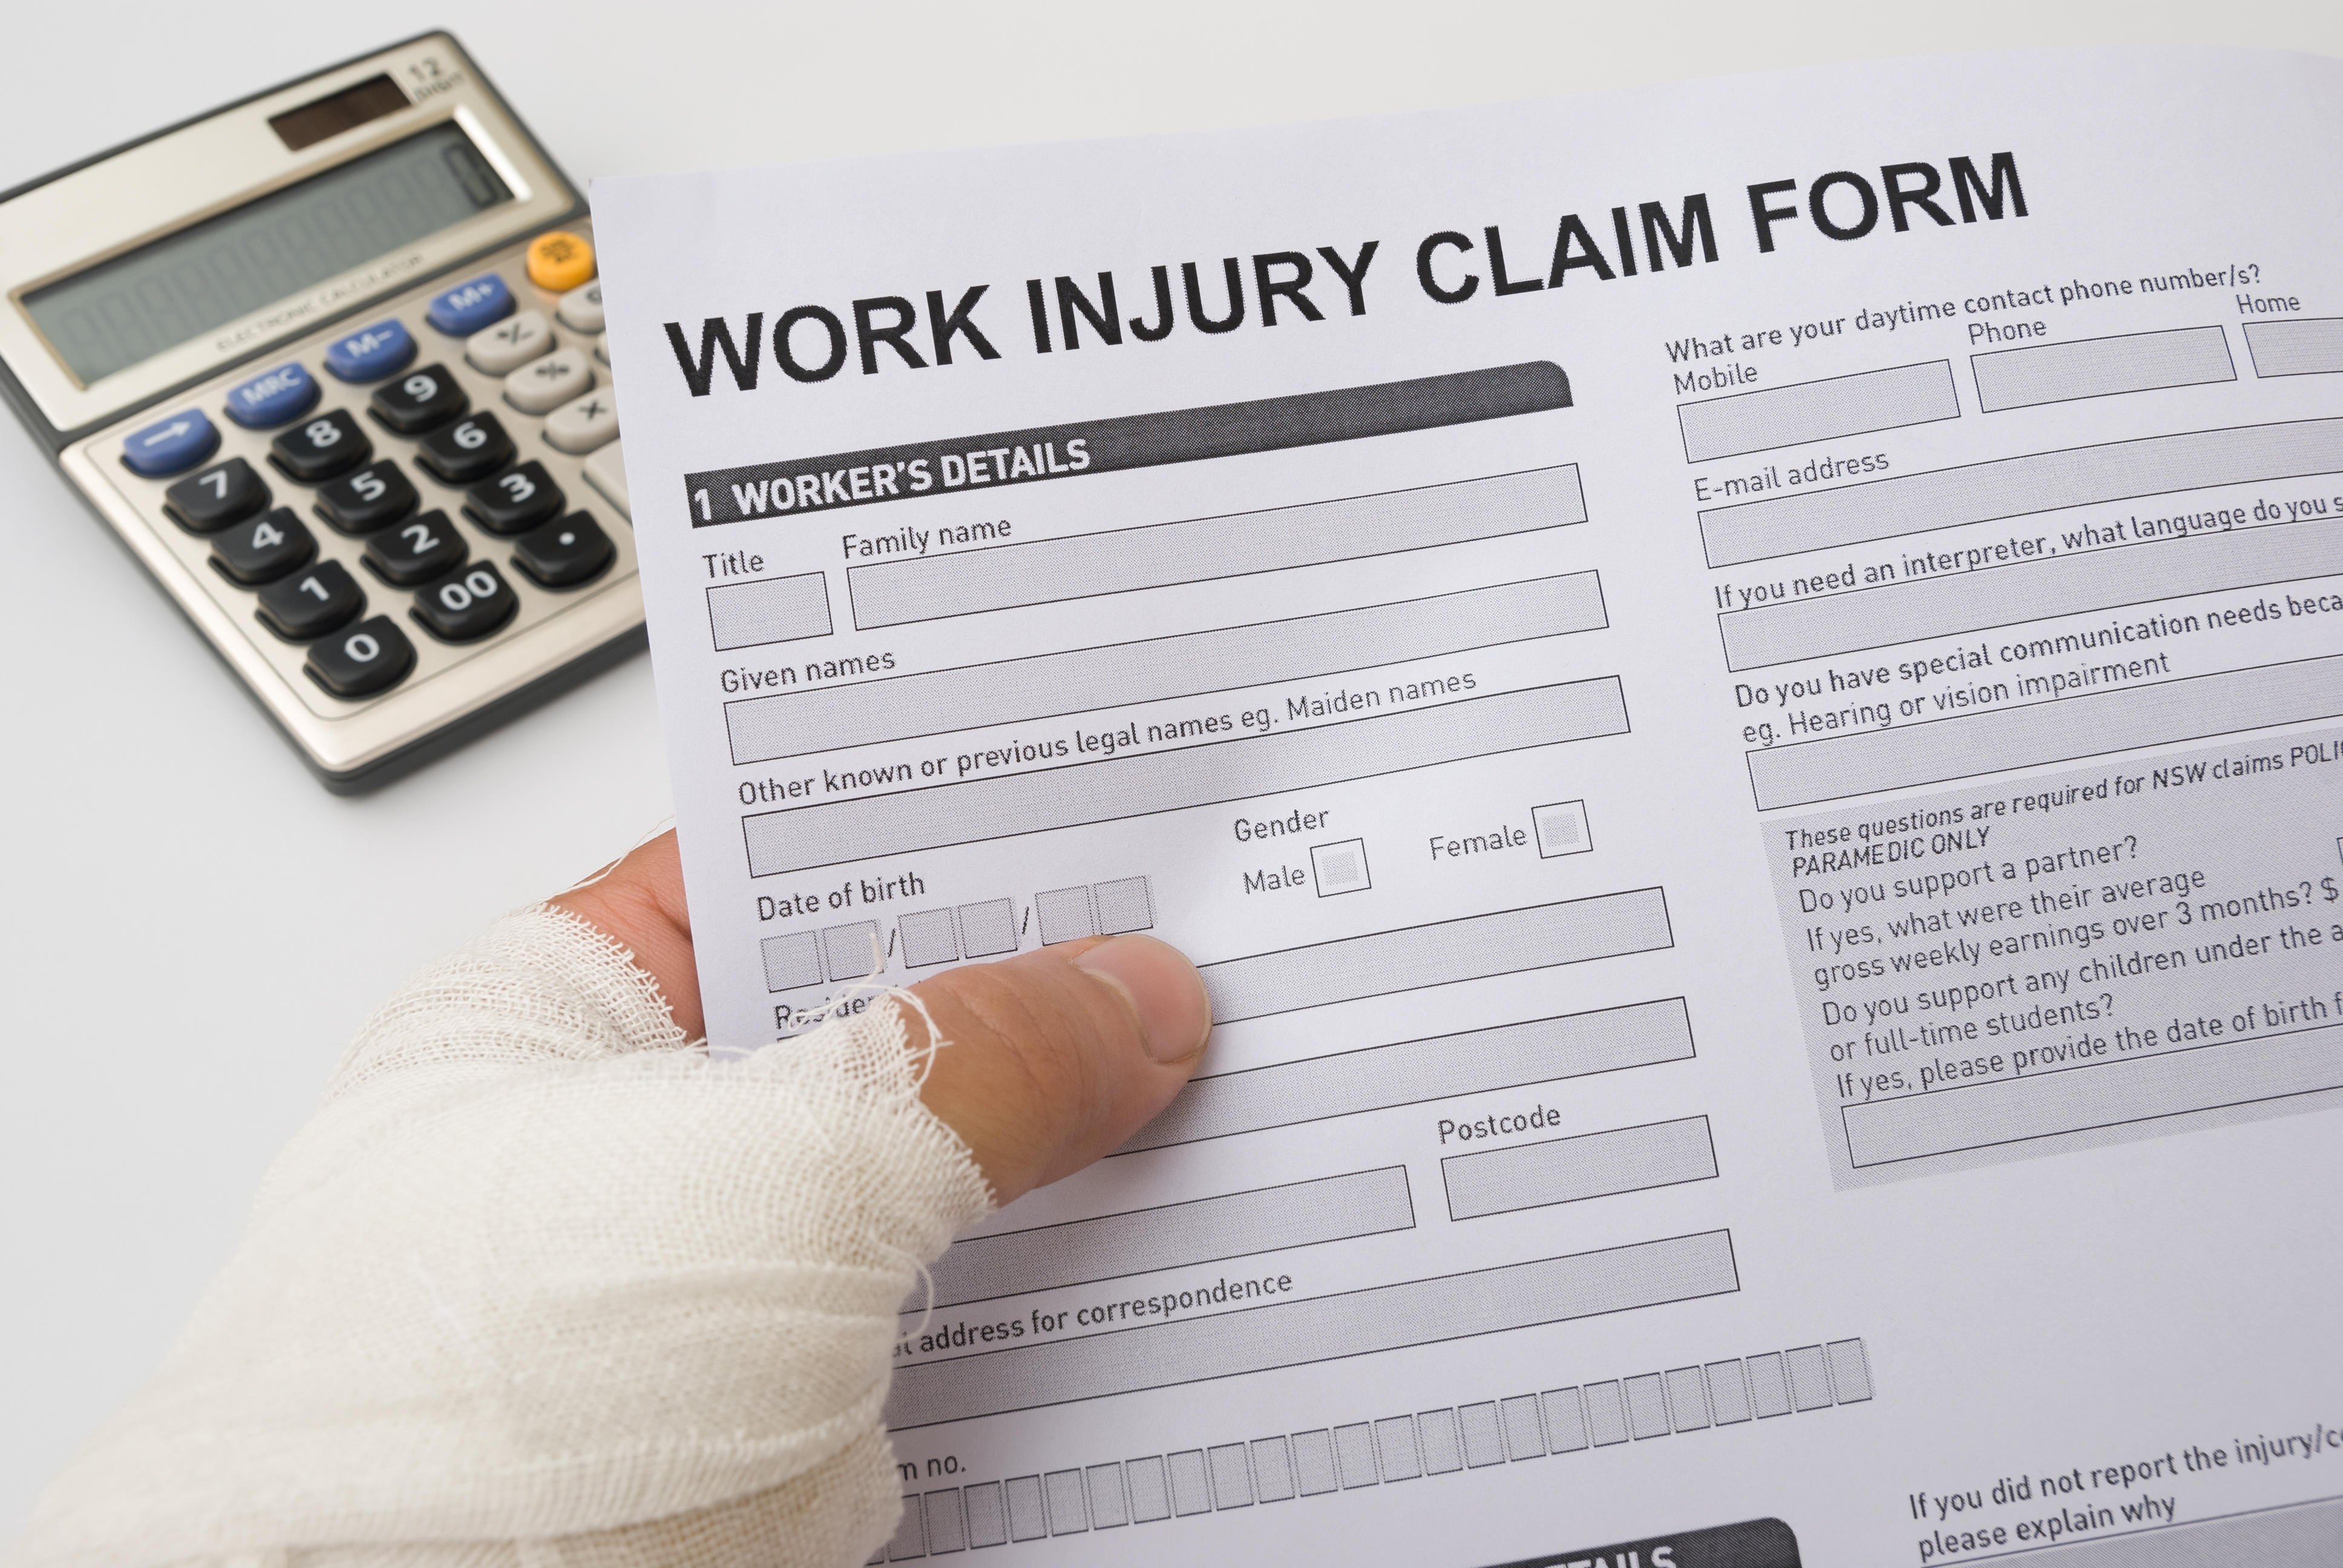 workers' comp wage loss benefits